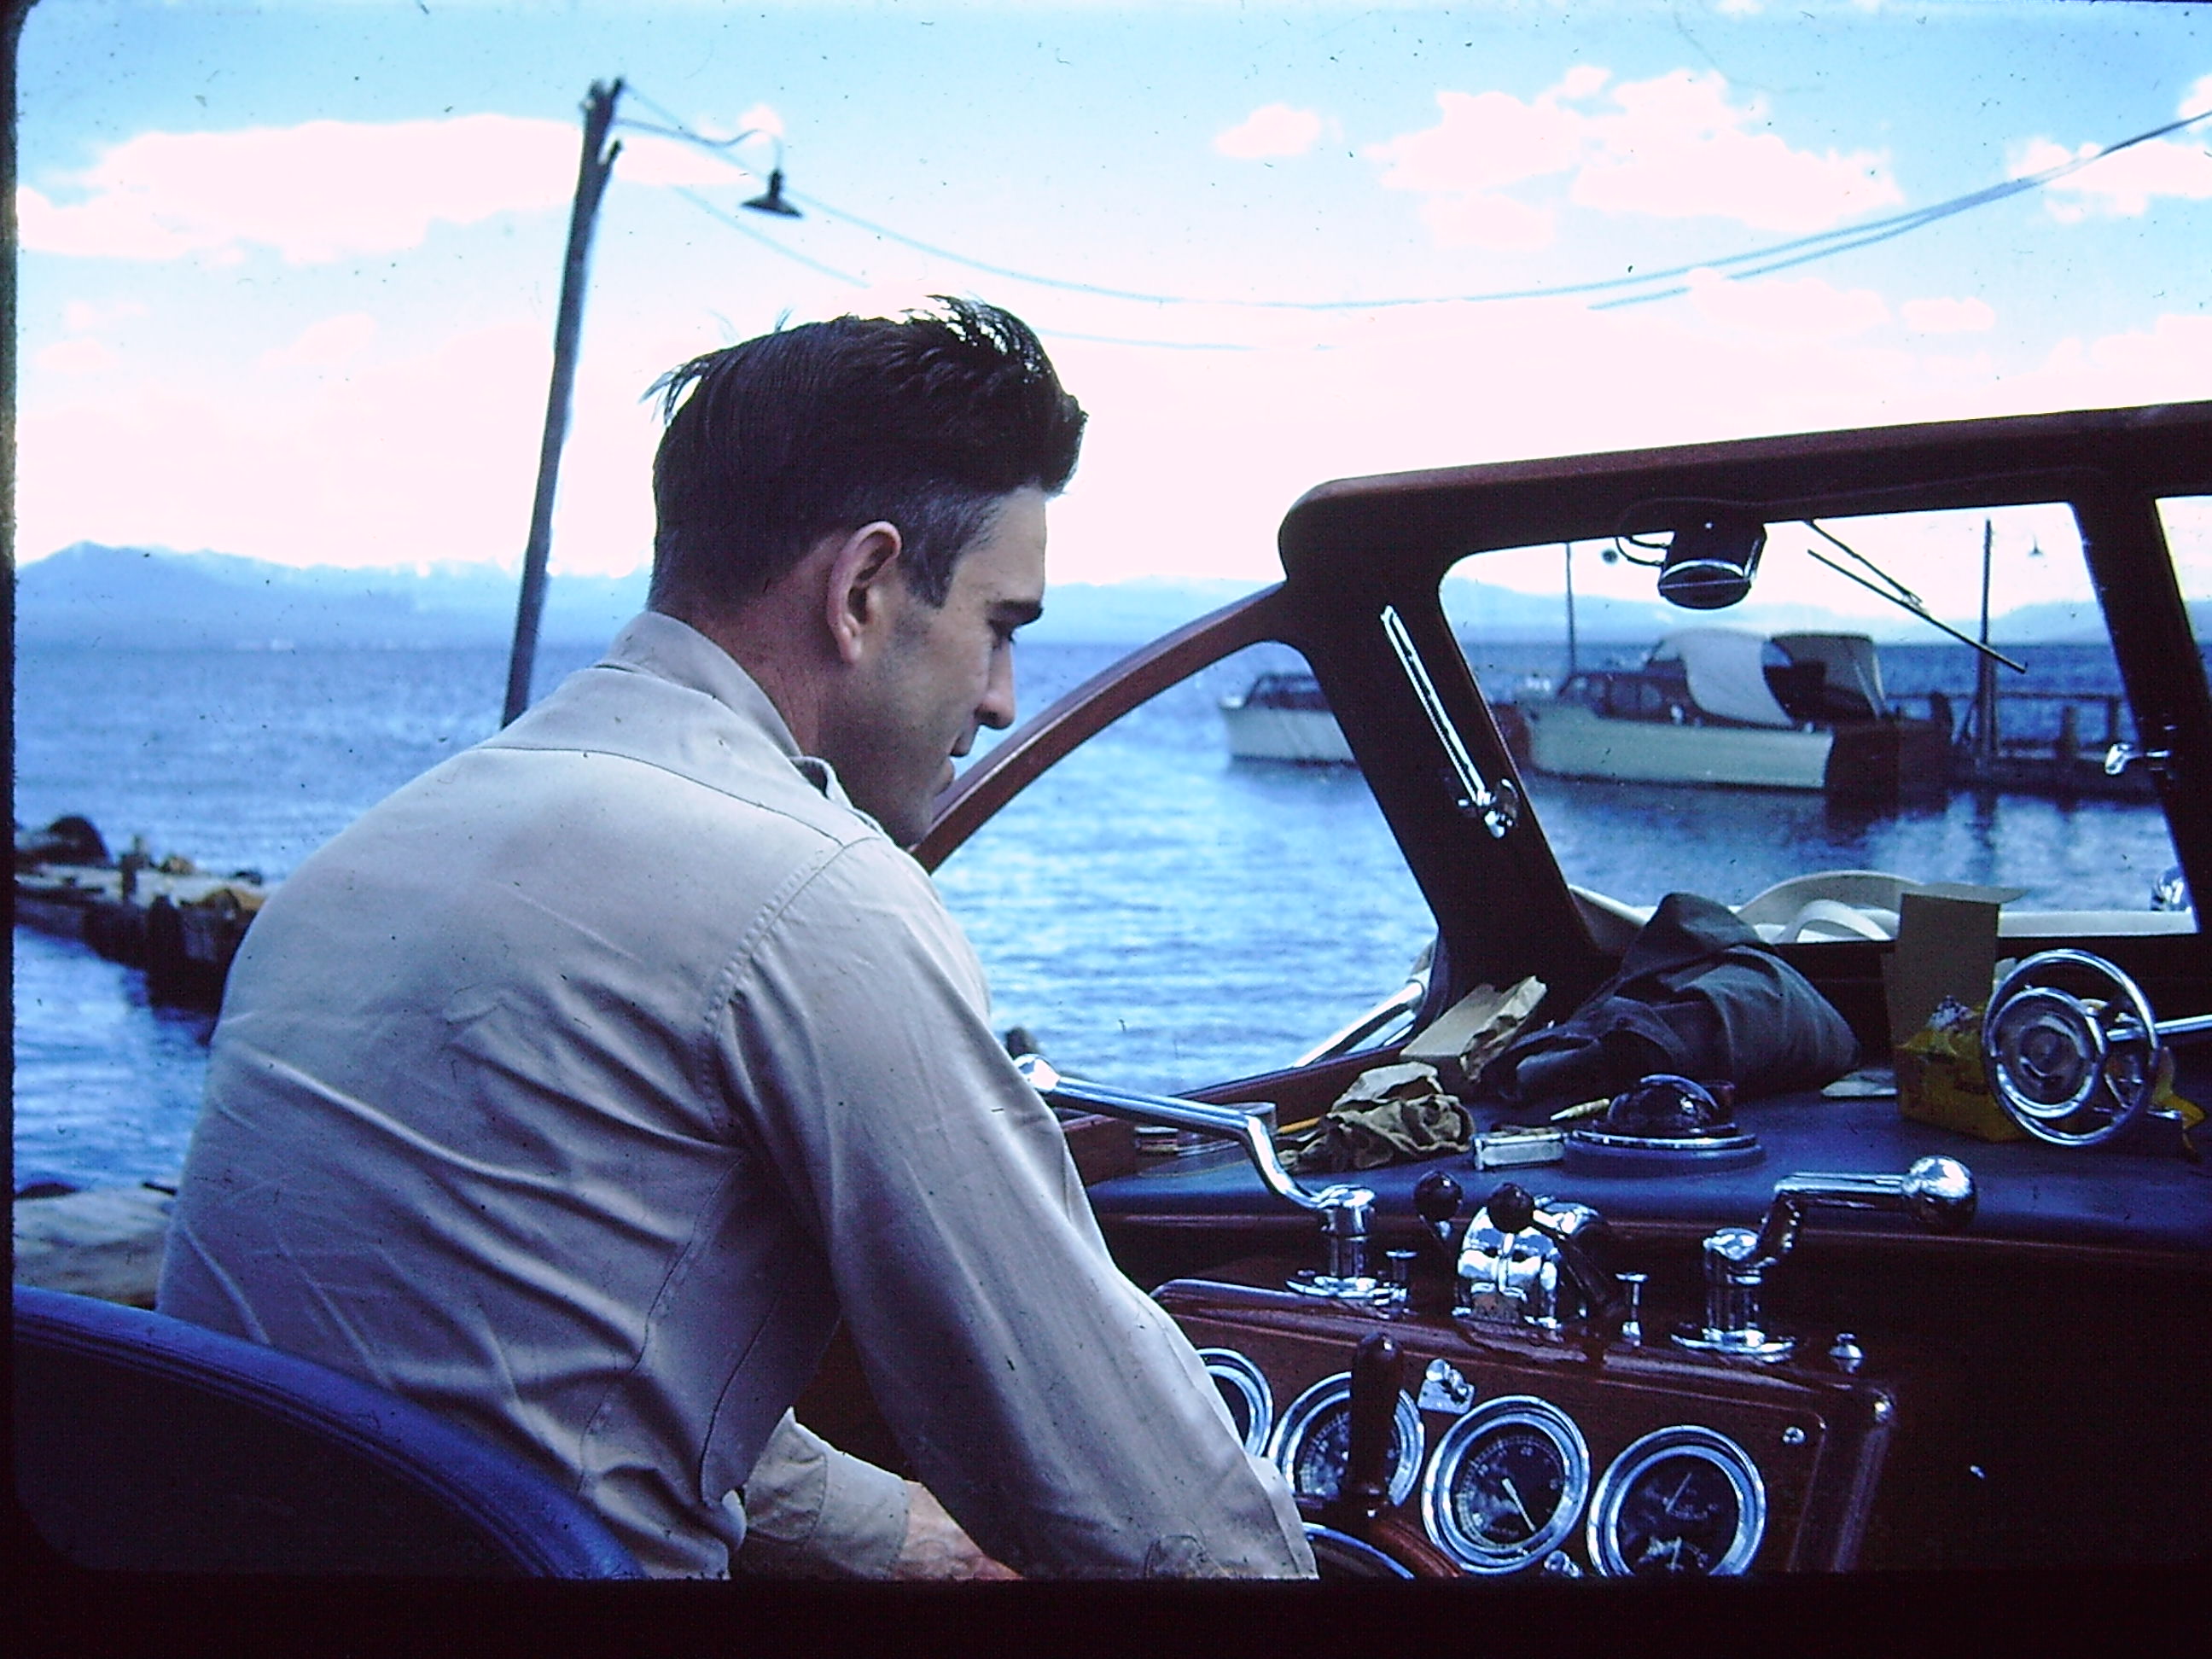 My grandfather piloting a boat